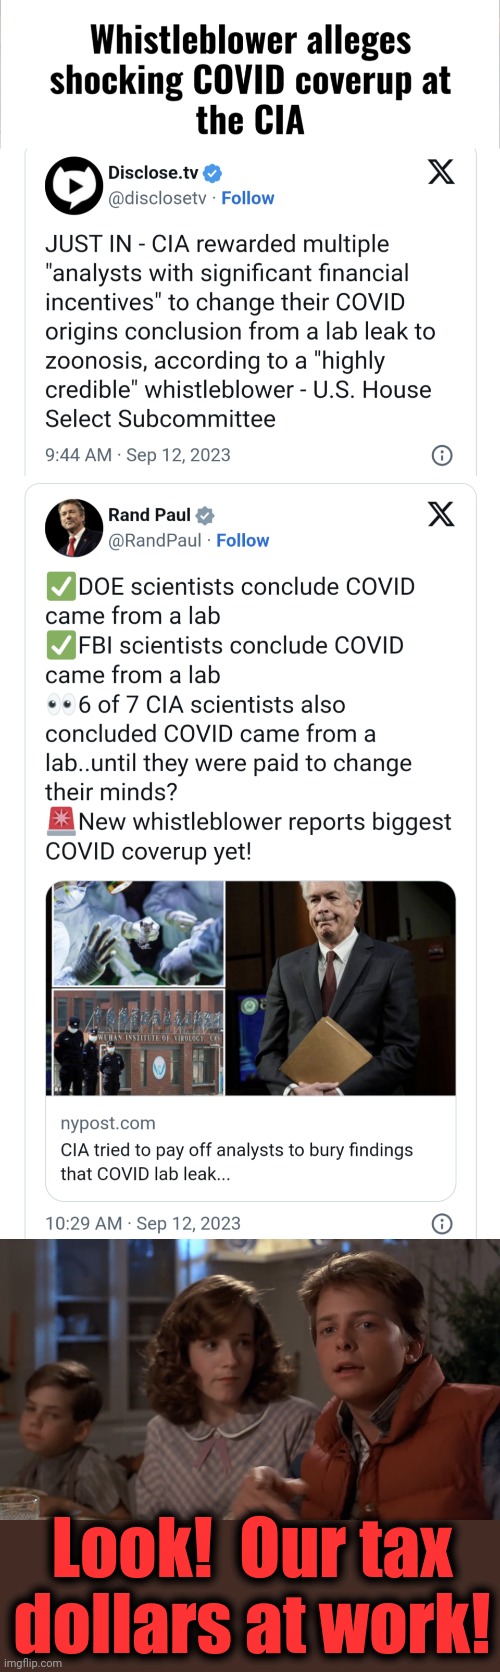 Look!  Our tax
dollars at work! | image tagged in hey i've seen this one,covid-19,central intelligence agency,cover up,lab leak,corruption | made w/ Imgflip meme maker